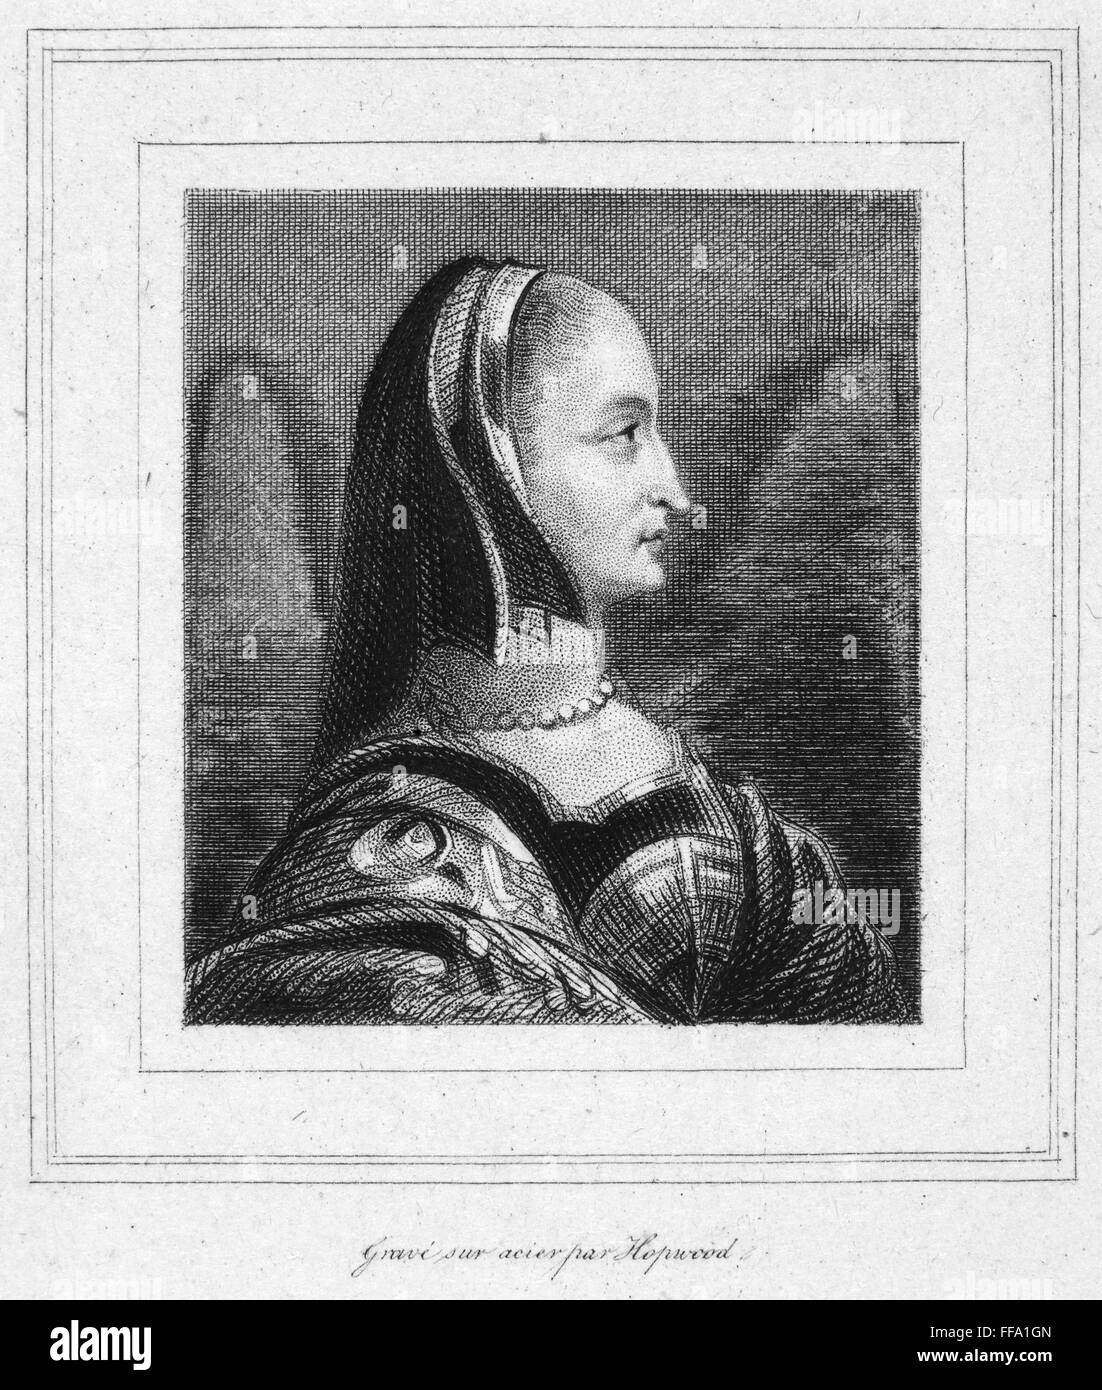 MARGARET OF VALOIS /n(1553-1615). Queen of King Henry IV of France. Line and stipple engraving, French, 19th century. Stock Photo